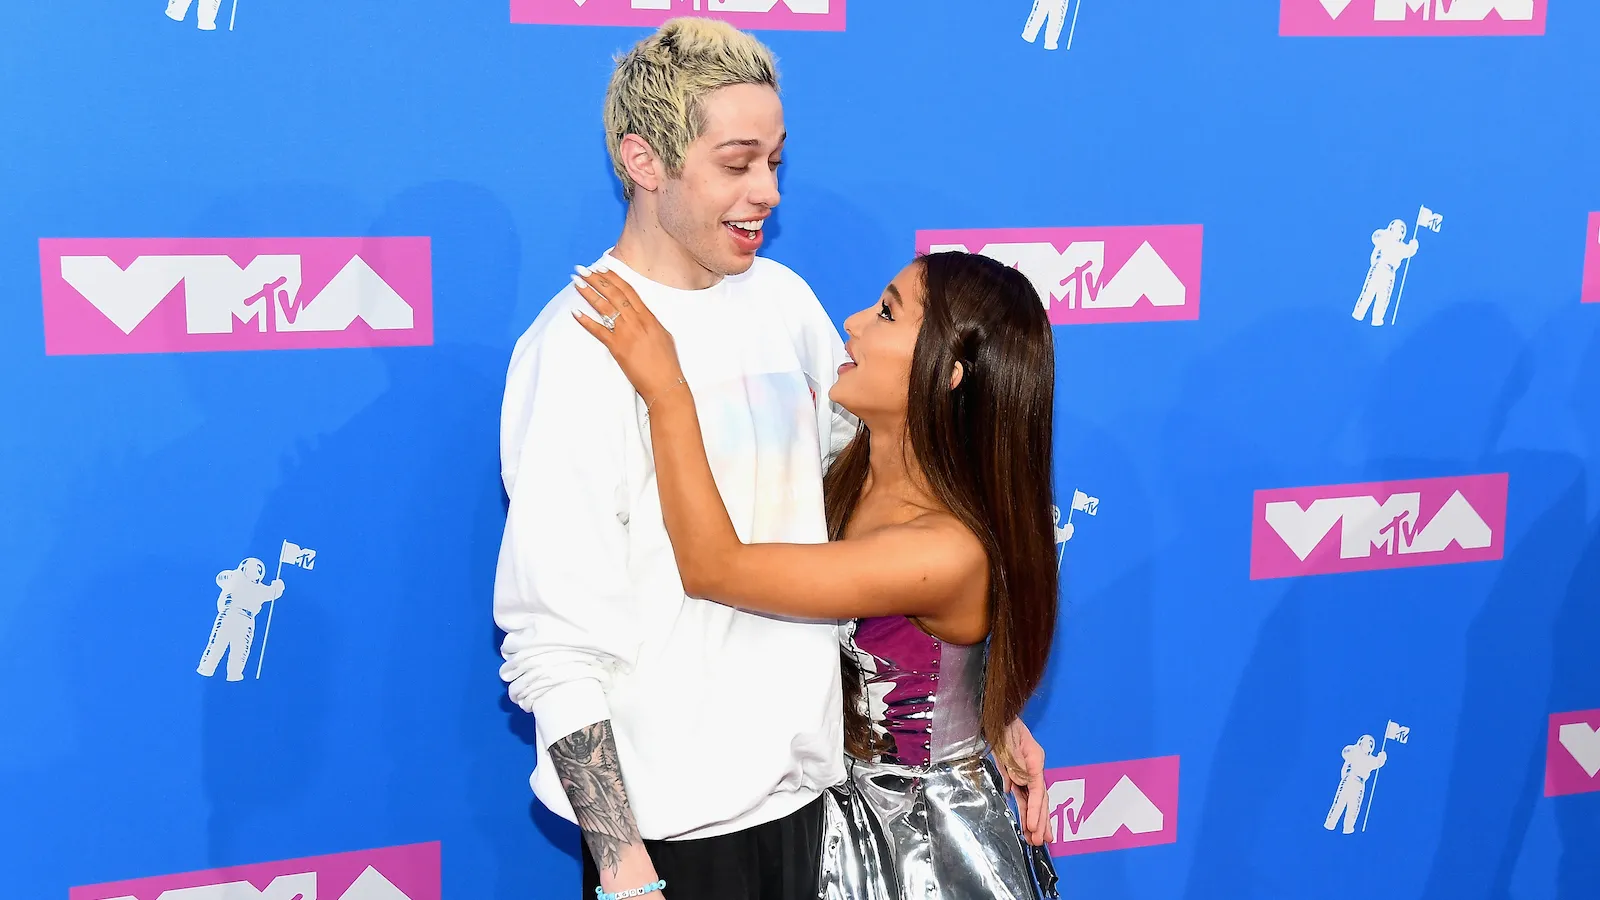 Pete Davidson and Ariana Grande are together on an MTV carpet. 